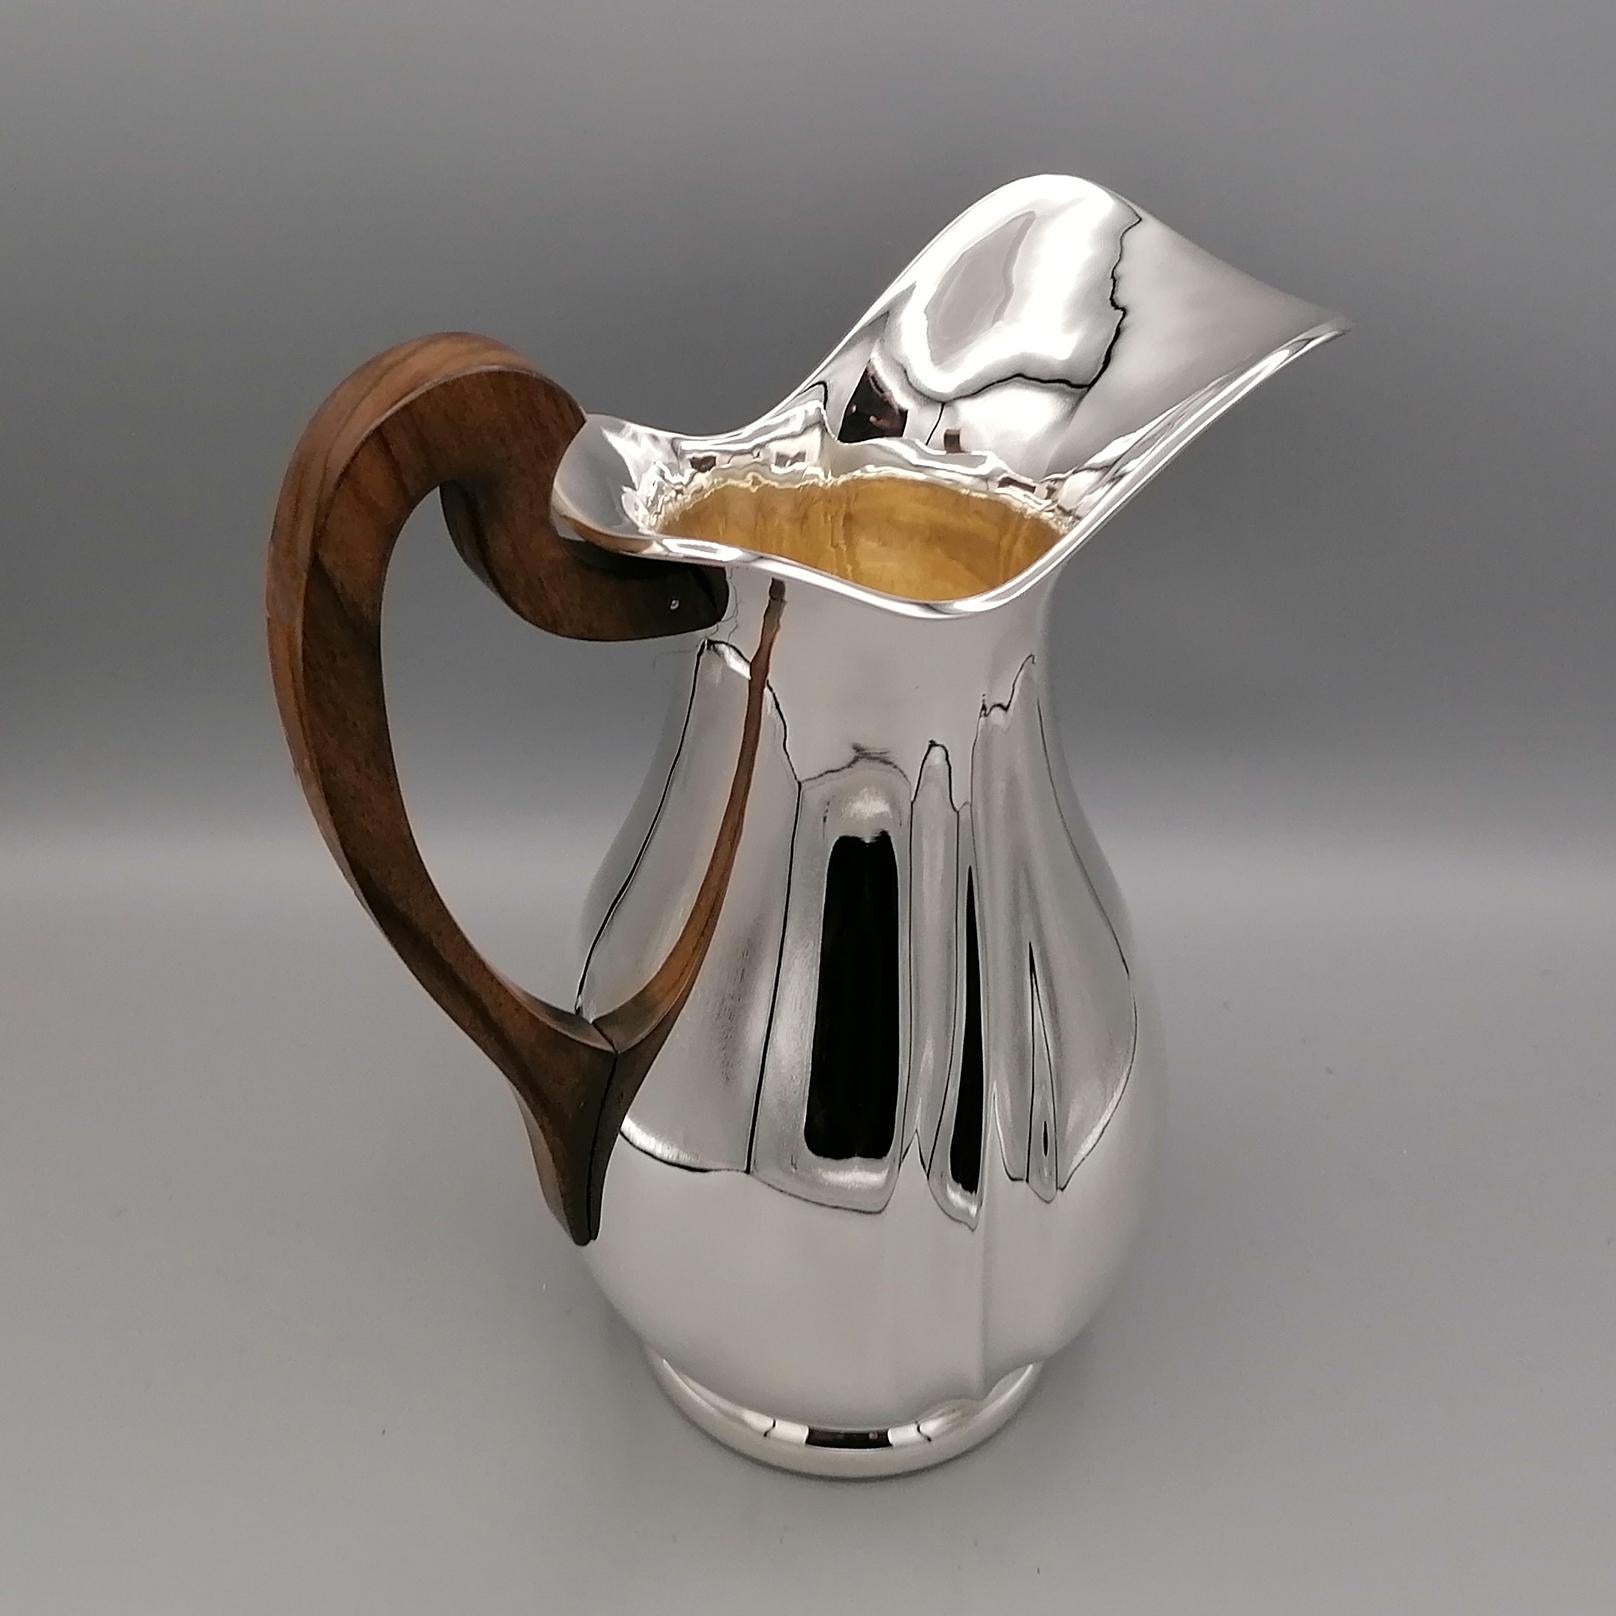 Contemporary 21st Century Italian Sterling Silver Jug For Sale